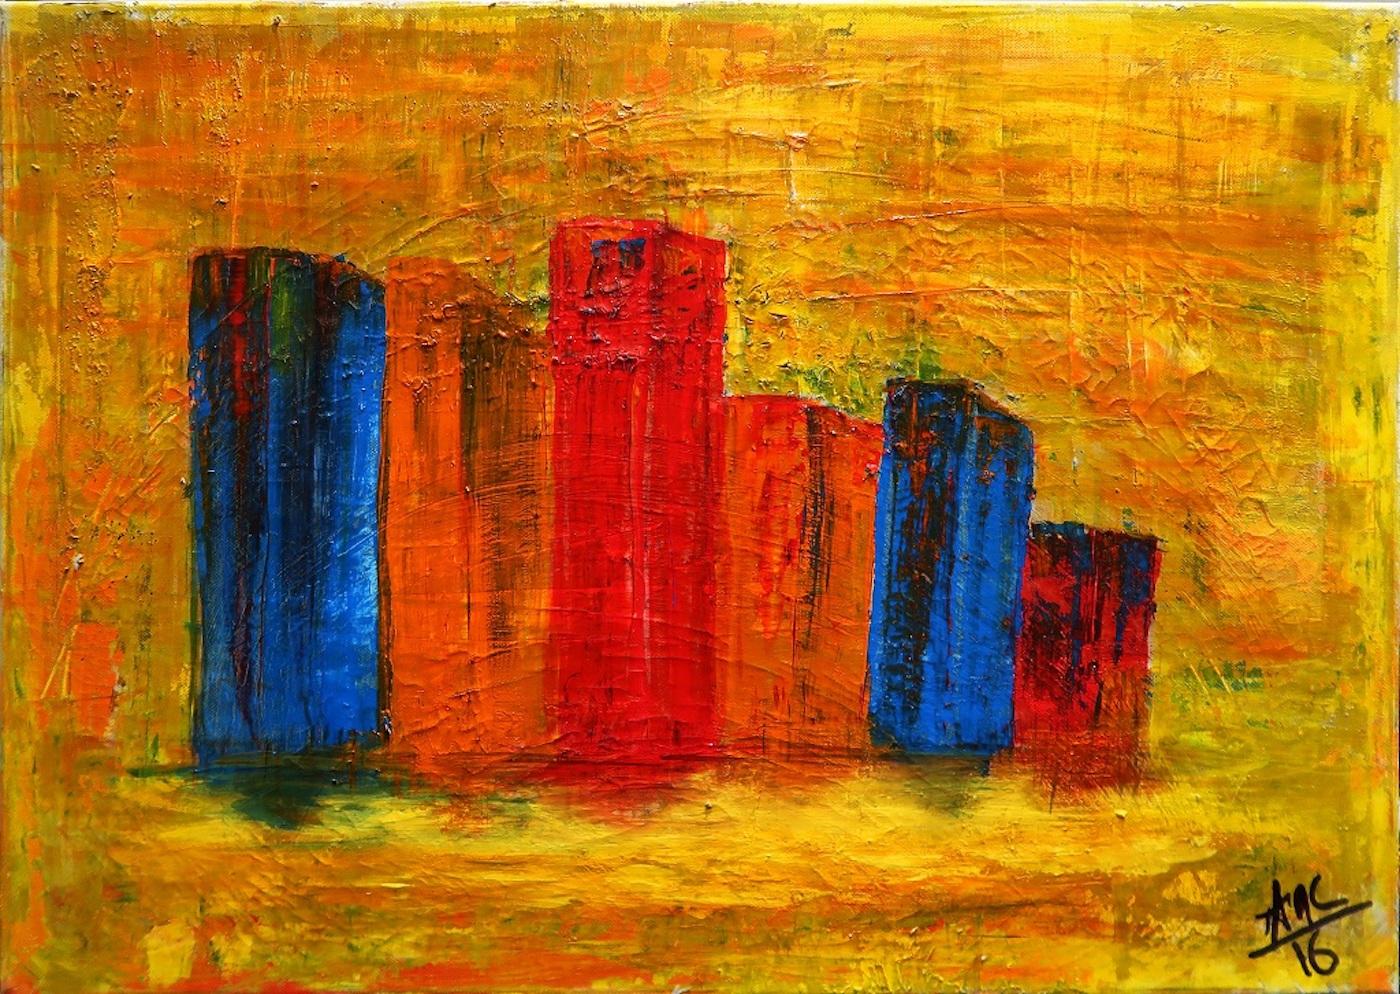 Anna Maria Caboni Abstract Painting - City 2 - Acrylic by A.M. Caboni - 2016